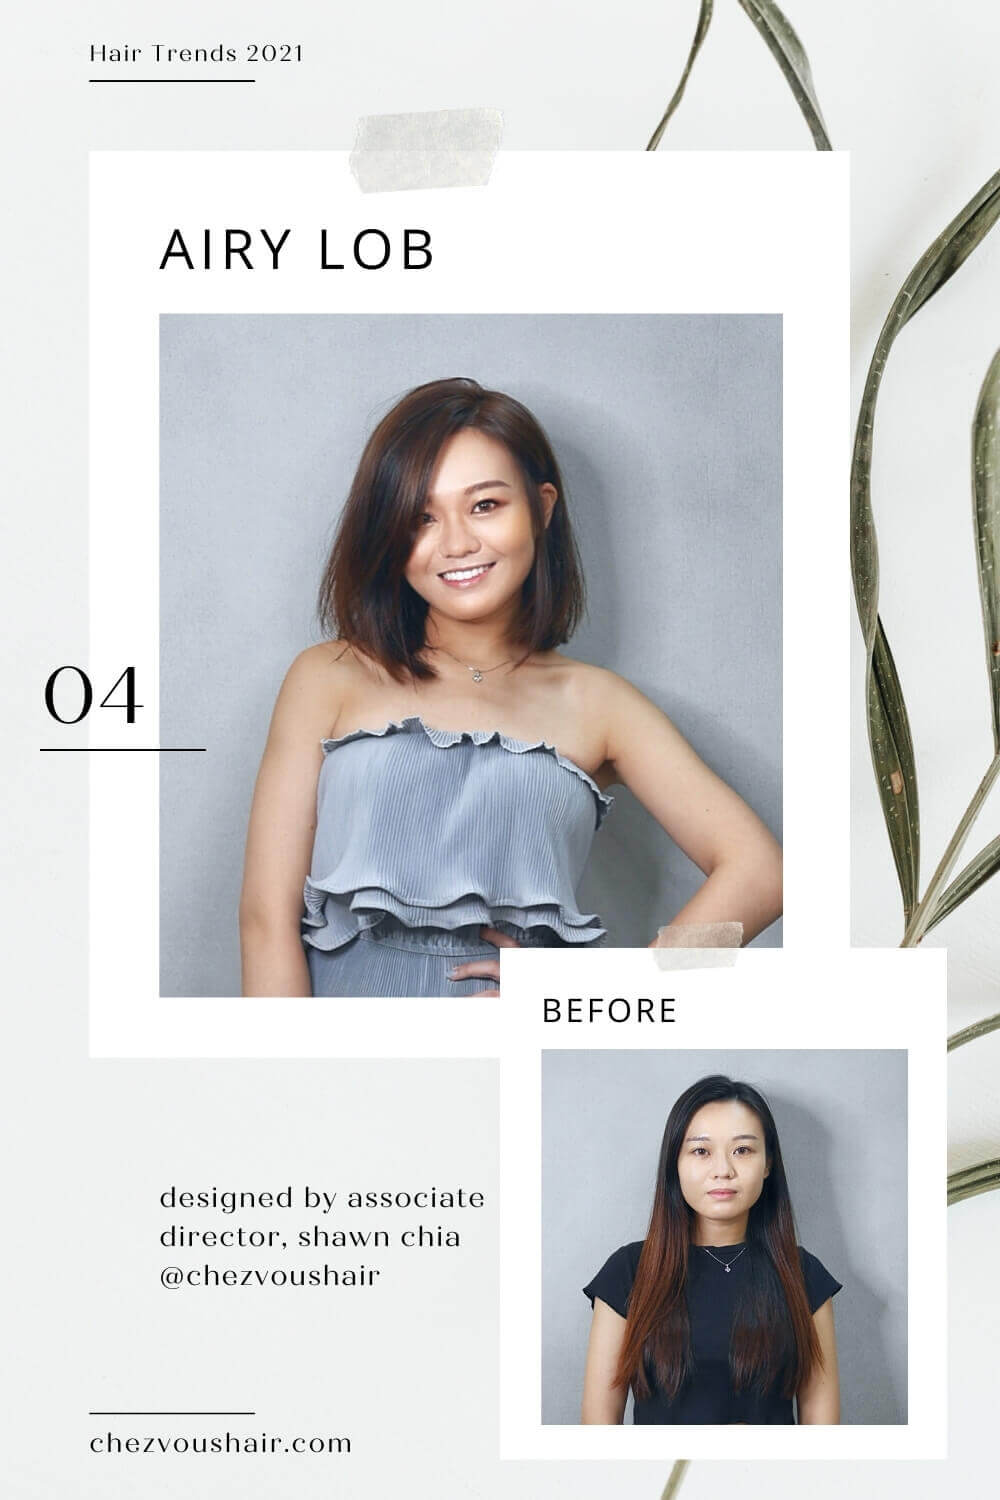 Hair Trends 2021: Airy Lob or Bob (a little imperfection doesn’t hurt)